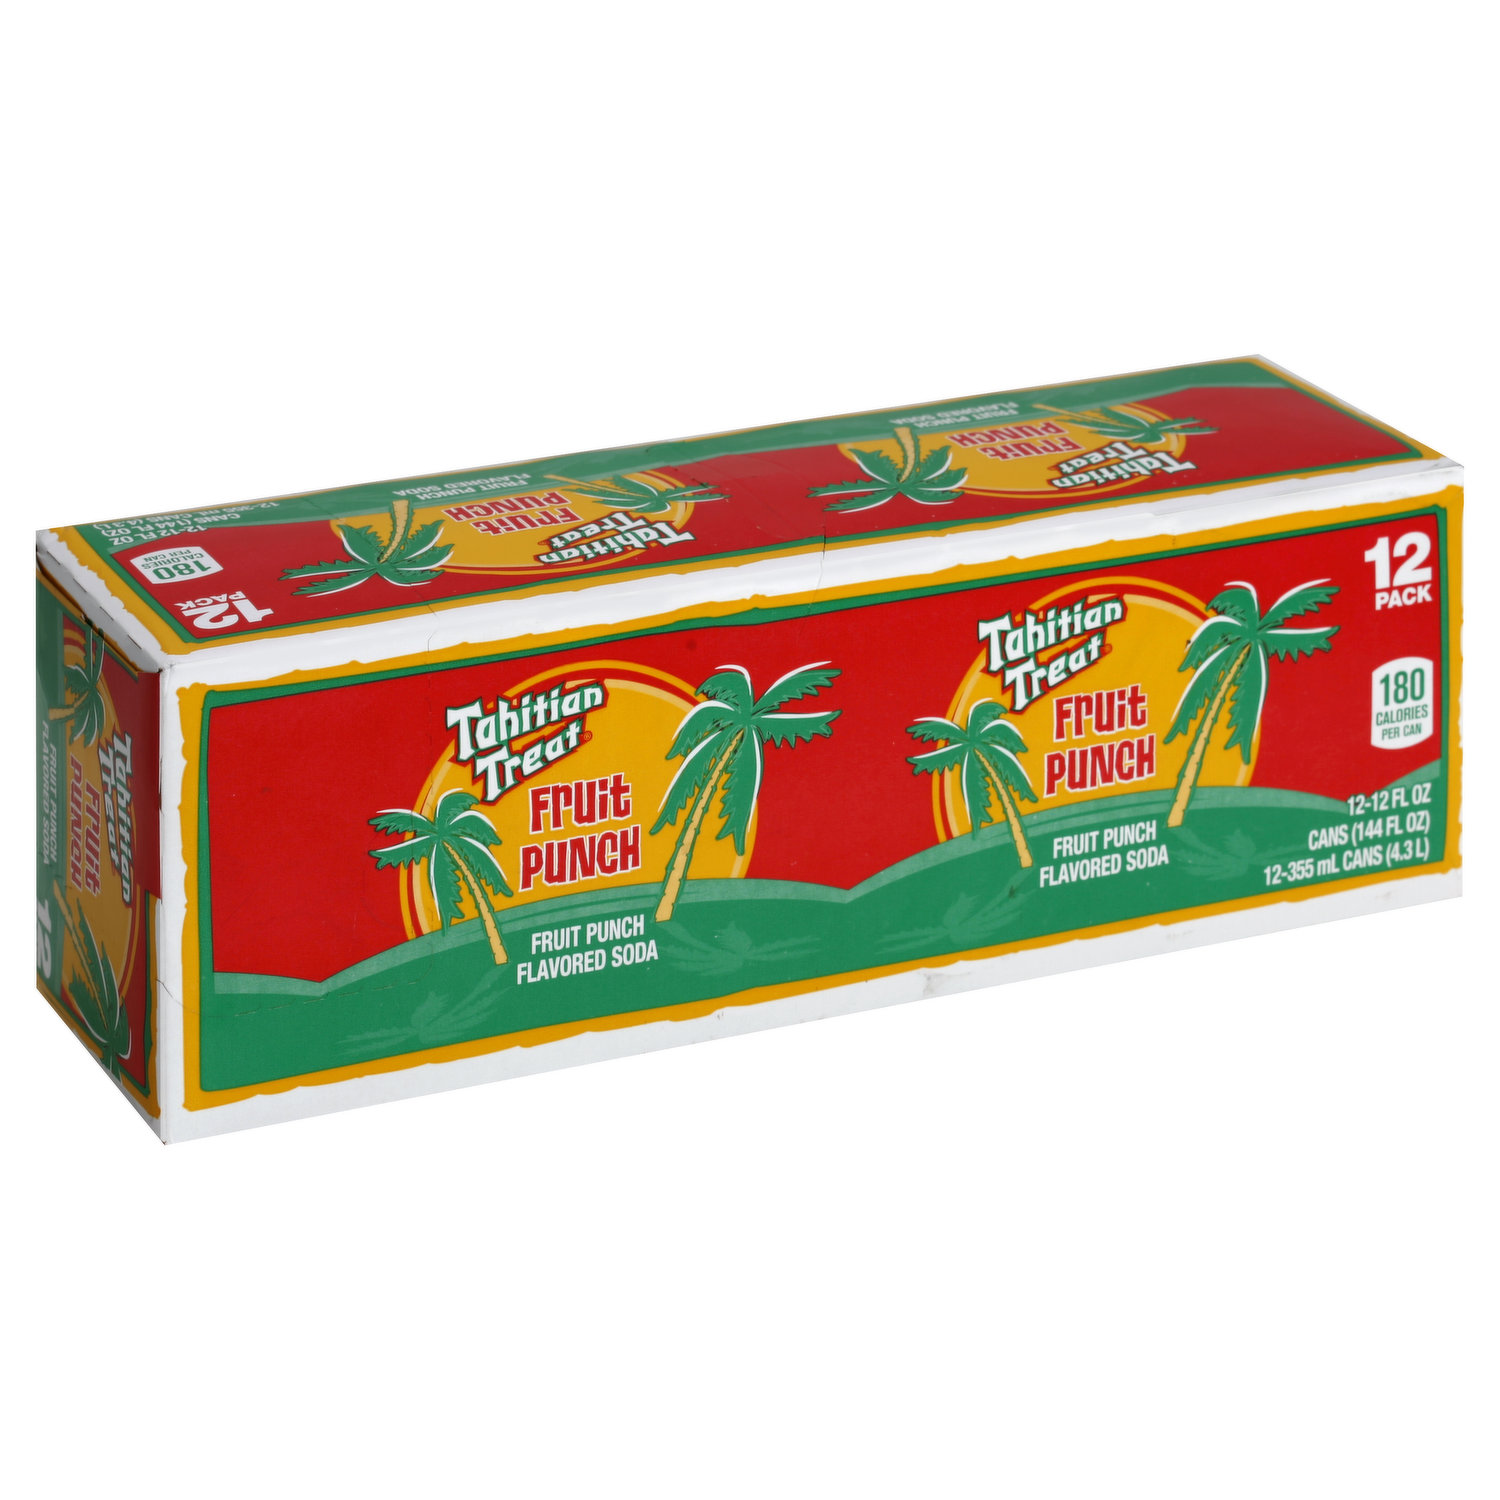  Tahitian Treat 12 Pack 12 Ounce Cans : Grocery & Gourmet Food